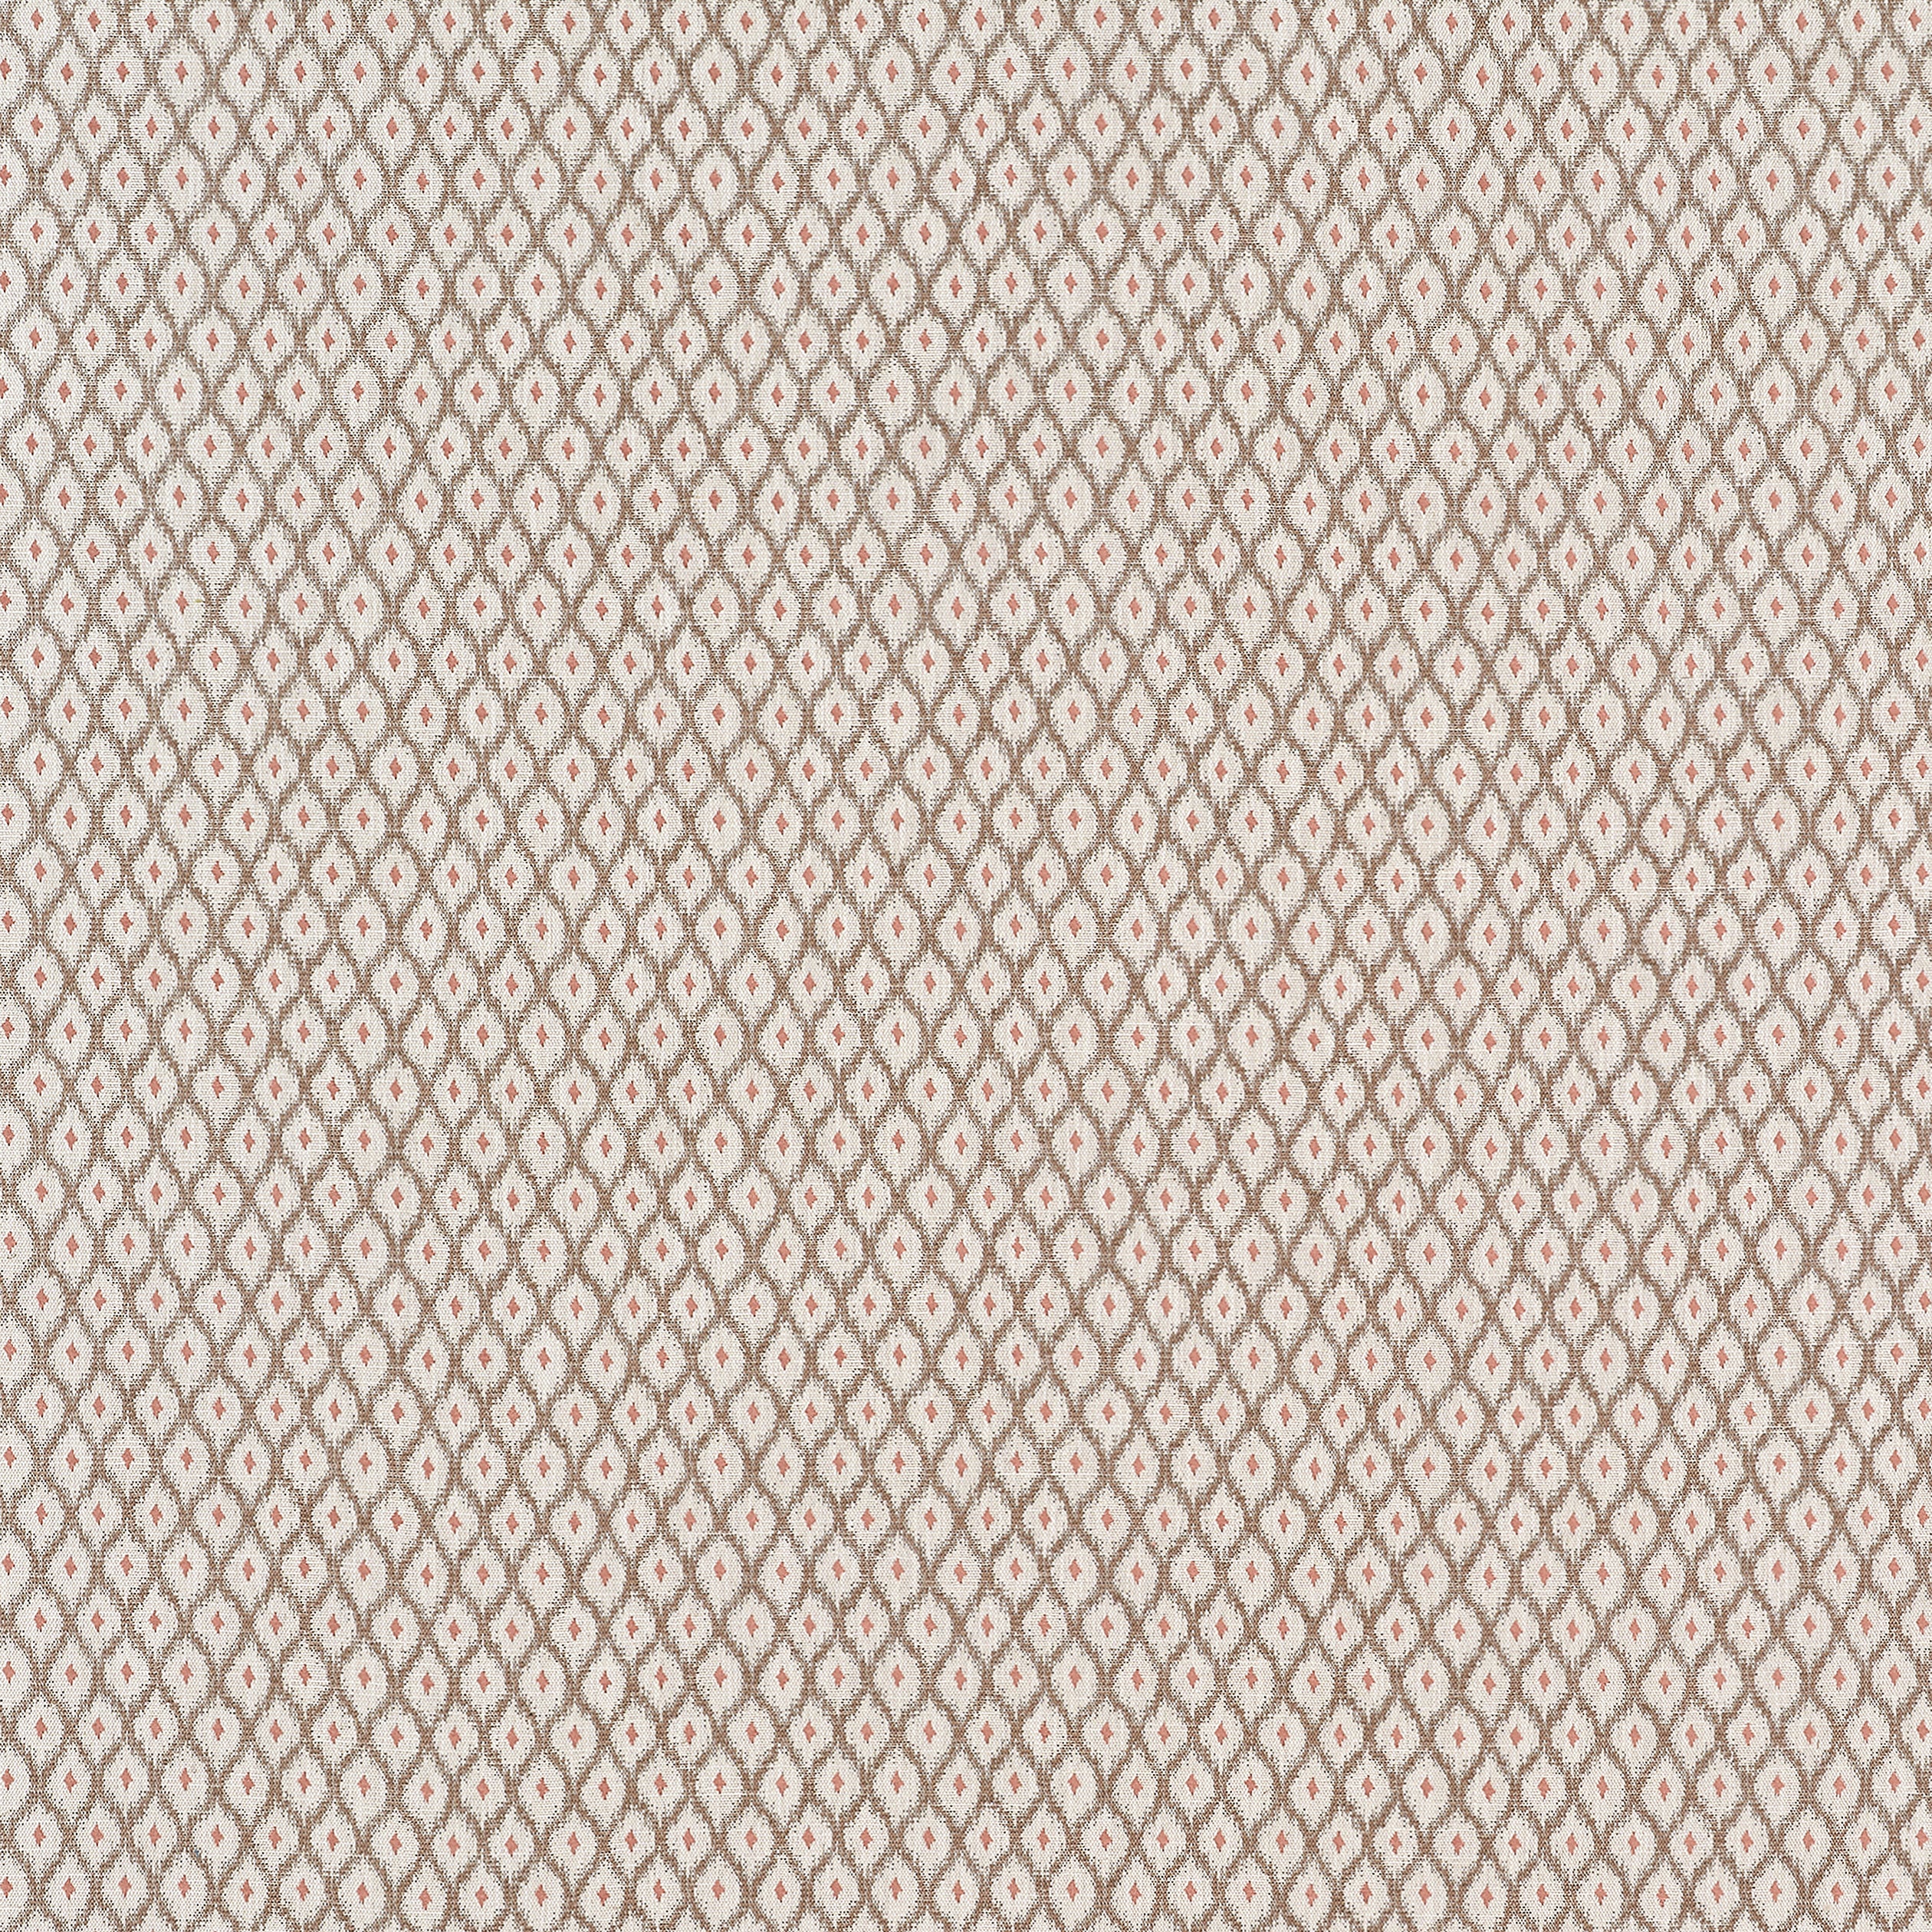 Josephine fabric in linen color - pattern number W81901 - by Thibaut in the Companions collection